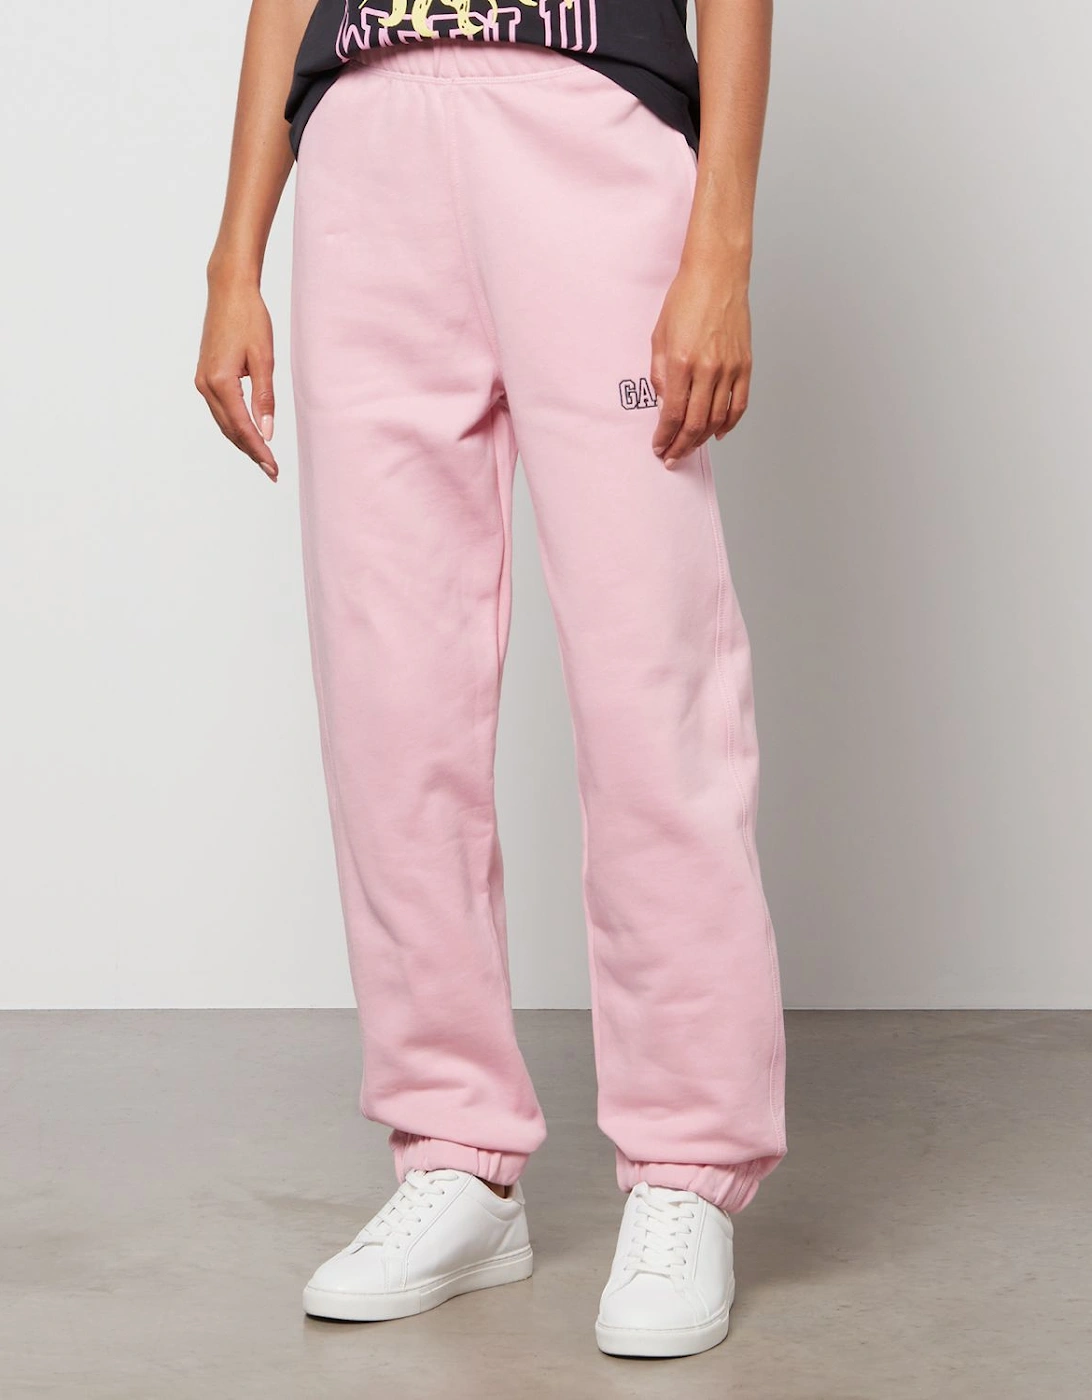 Women's Software Isoli Sweatpants - Sweet Lilac - - Home - Brands - - Women's Software Isoli Sweatpants - Sweet Lilac